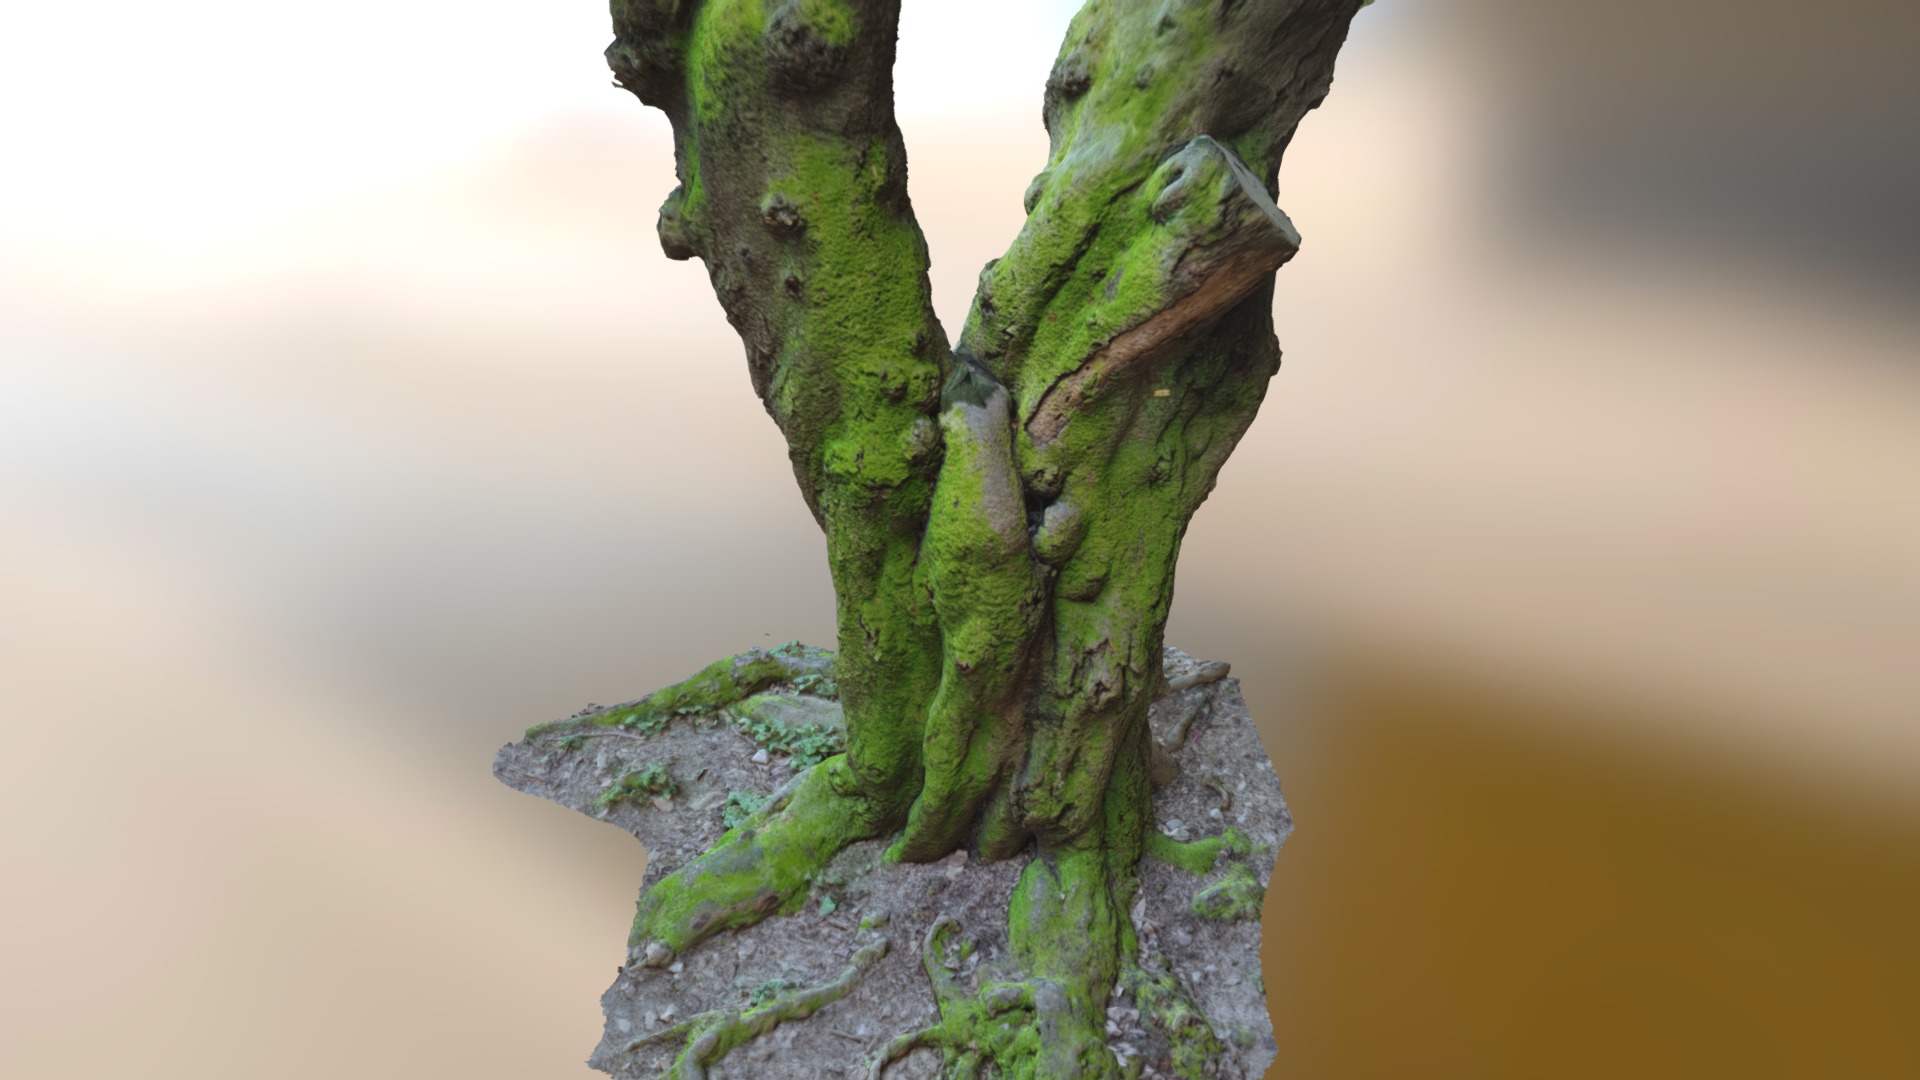 3D model Tokyo Park Tree scan - This is a 3D model of the Tokyo Park Tree scan. The 3D model is about a tree trunk with moss growing on it.